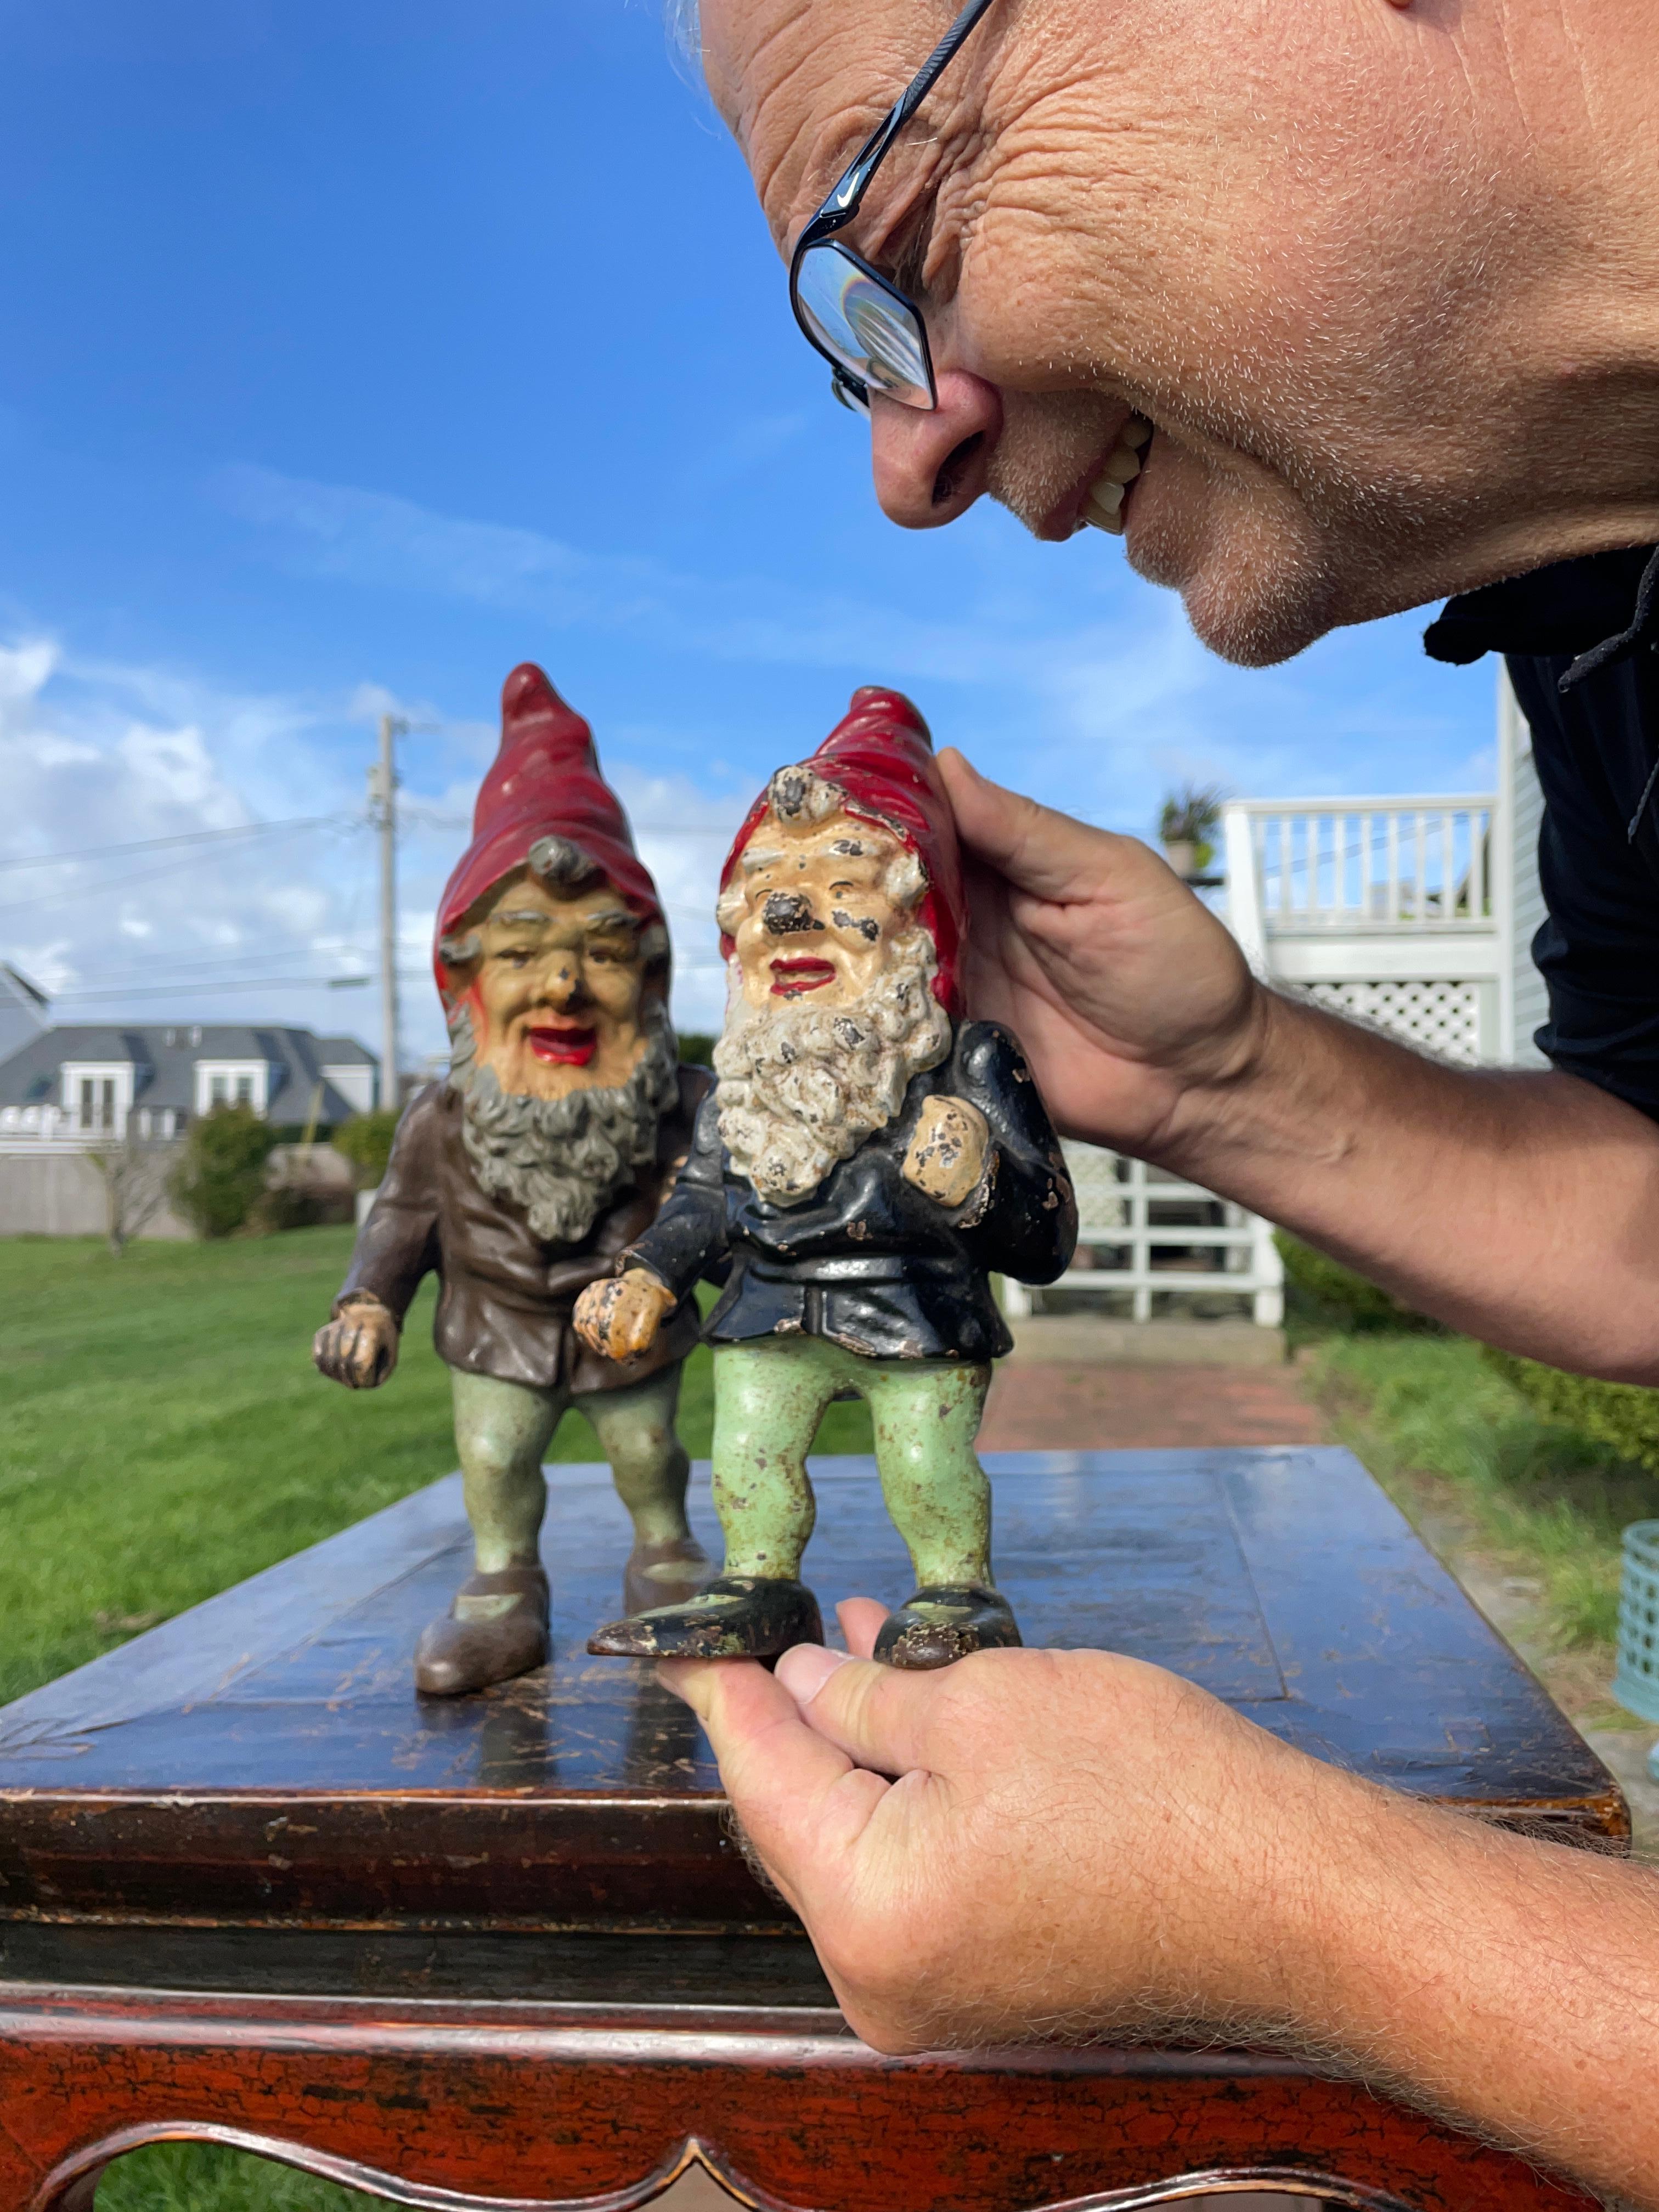 Nostalgic opportunity- a time for joy.

America's friendly gnomes- a rare pair (2) of Happy Garden Legends.

Since the early part of the 20th century, American gardeners have been infatuated with these loveable garden gnomes.
No wonder why, as